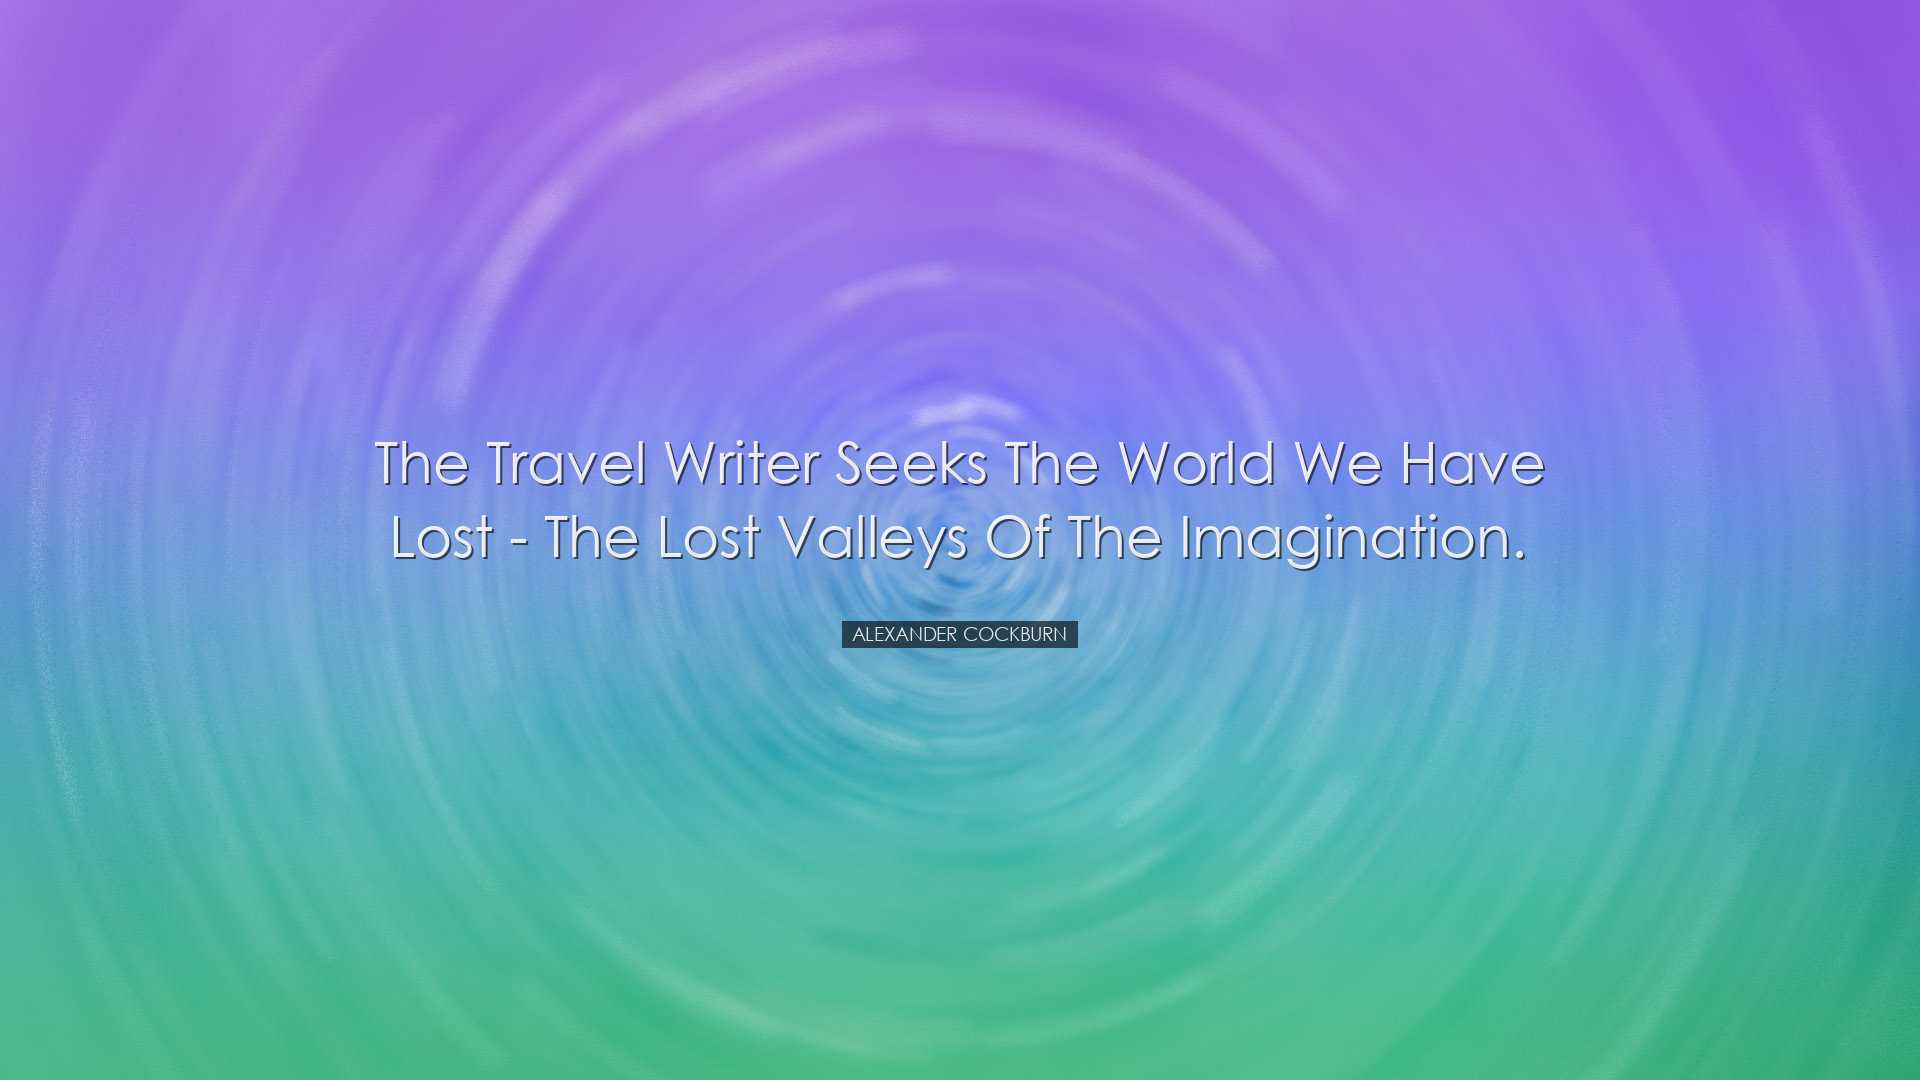 The travel writer seeks the world we have lost - the lost valleys